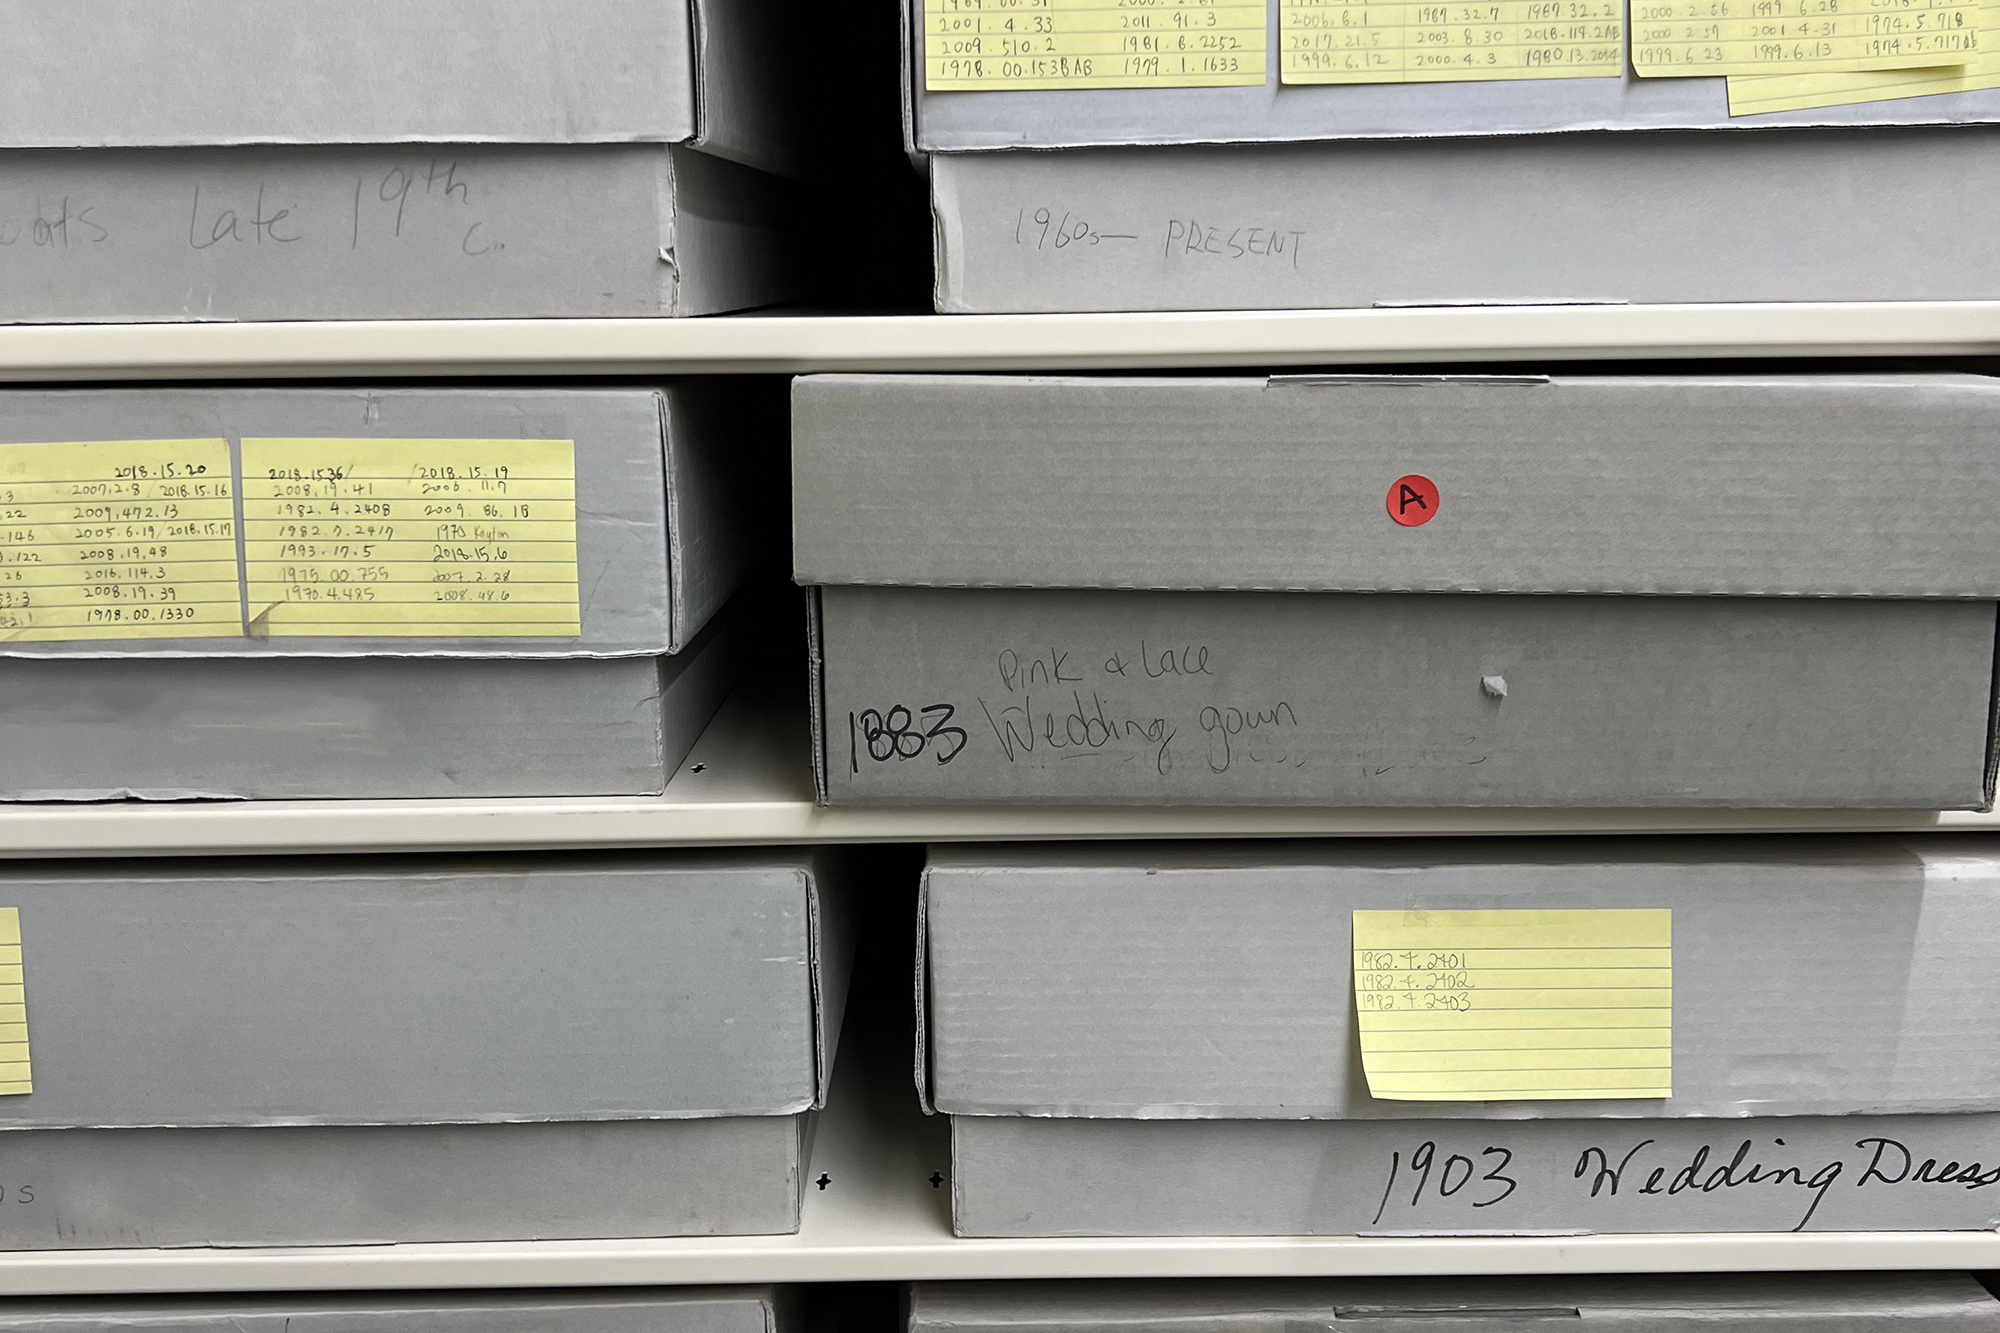 labeled boxes in the collection